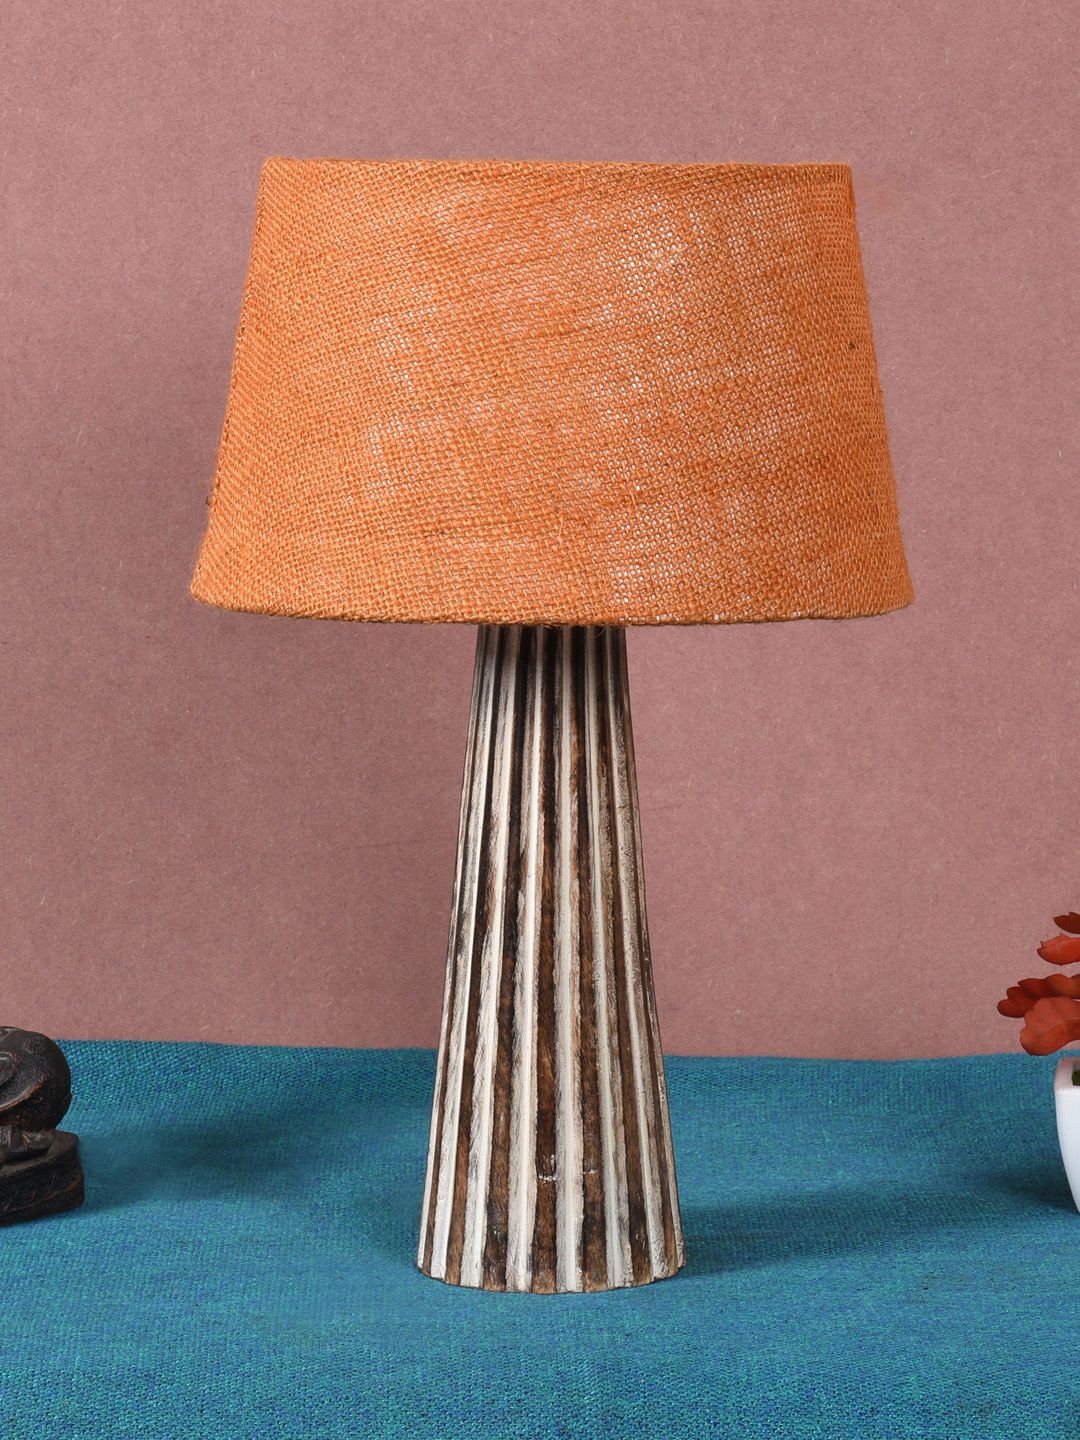 foziq Brown & Orange Textured Wooden Table Lamps Price in India